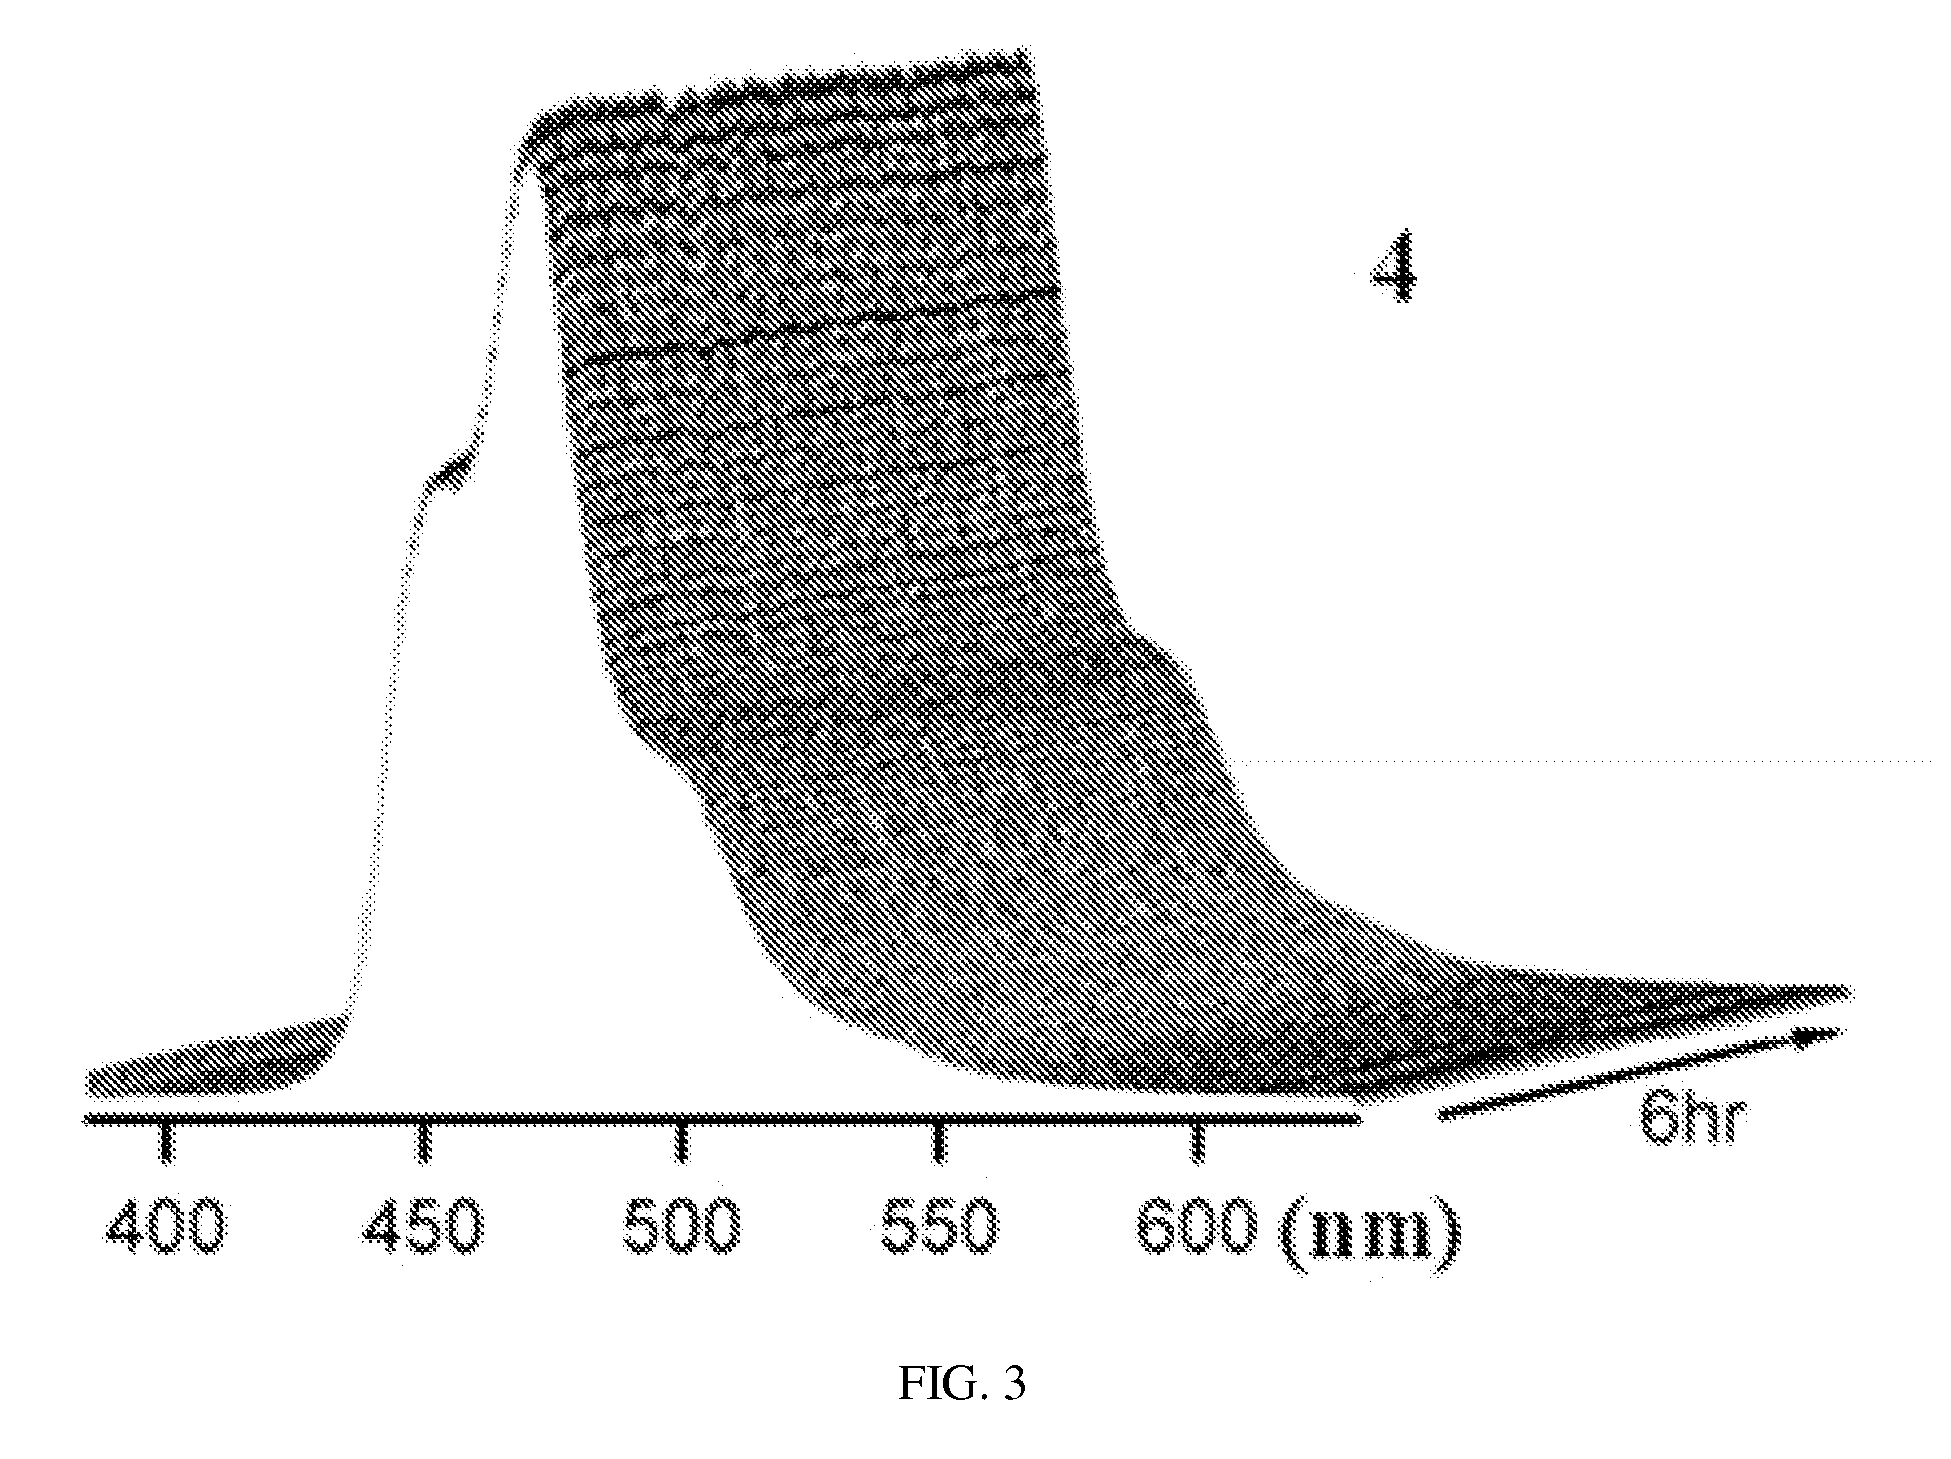 Air-stable, blue light emitting chemical compounds